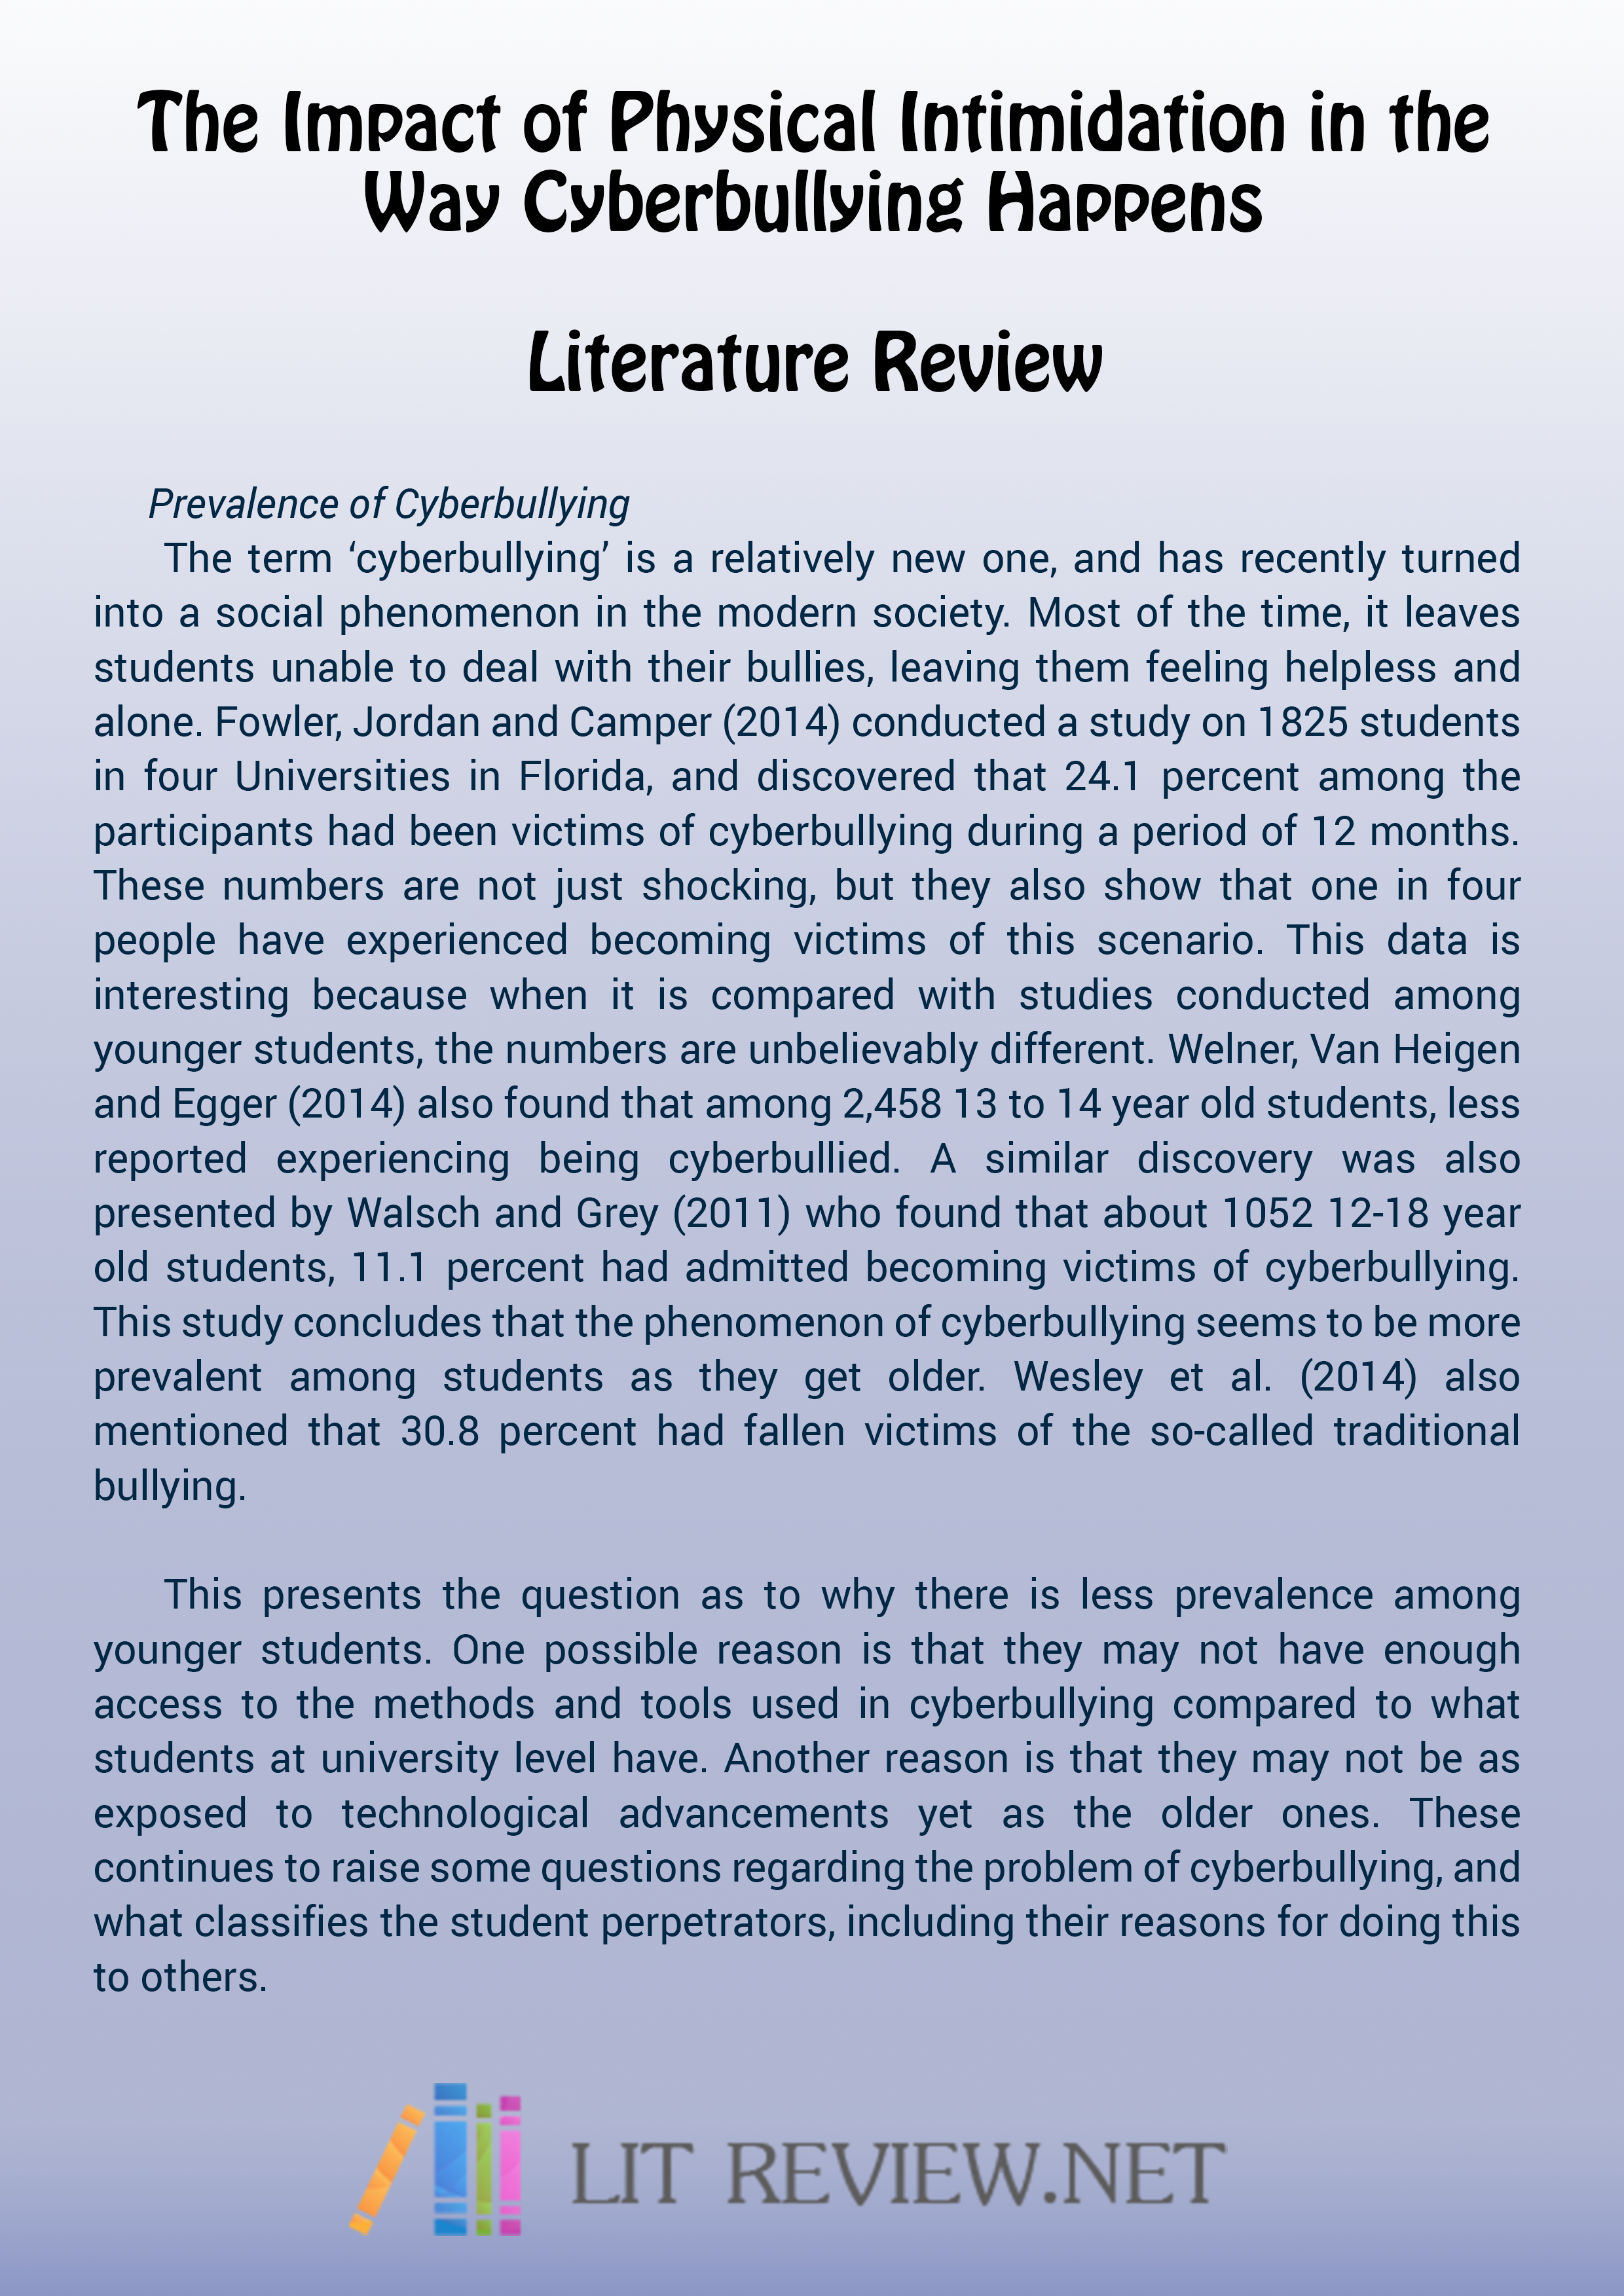 Purpose of literature review in phd thesis